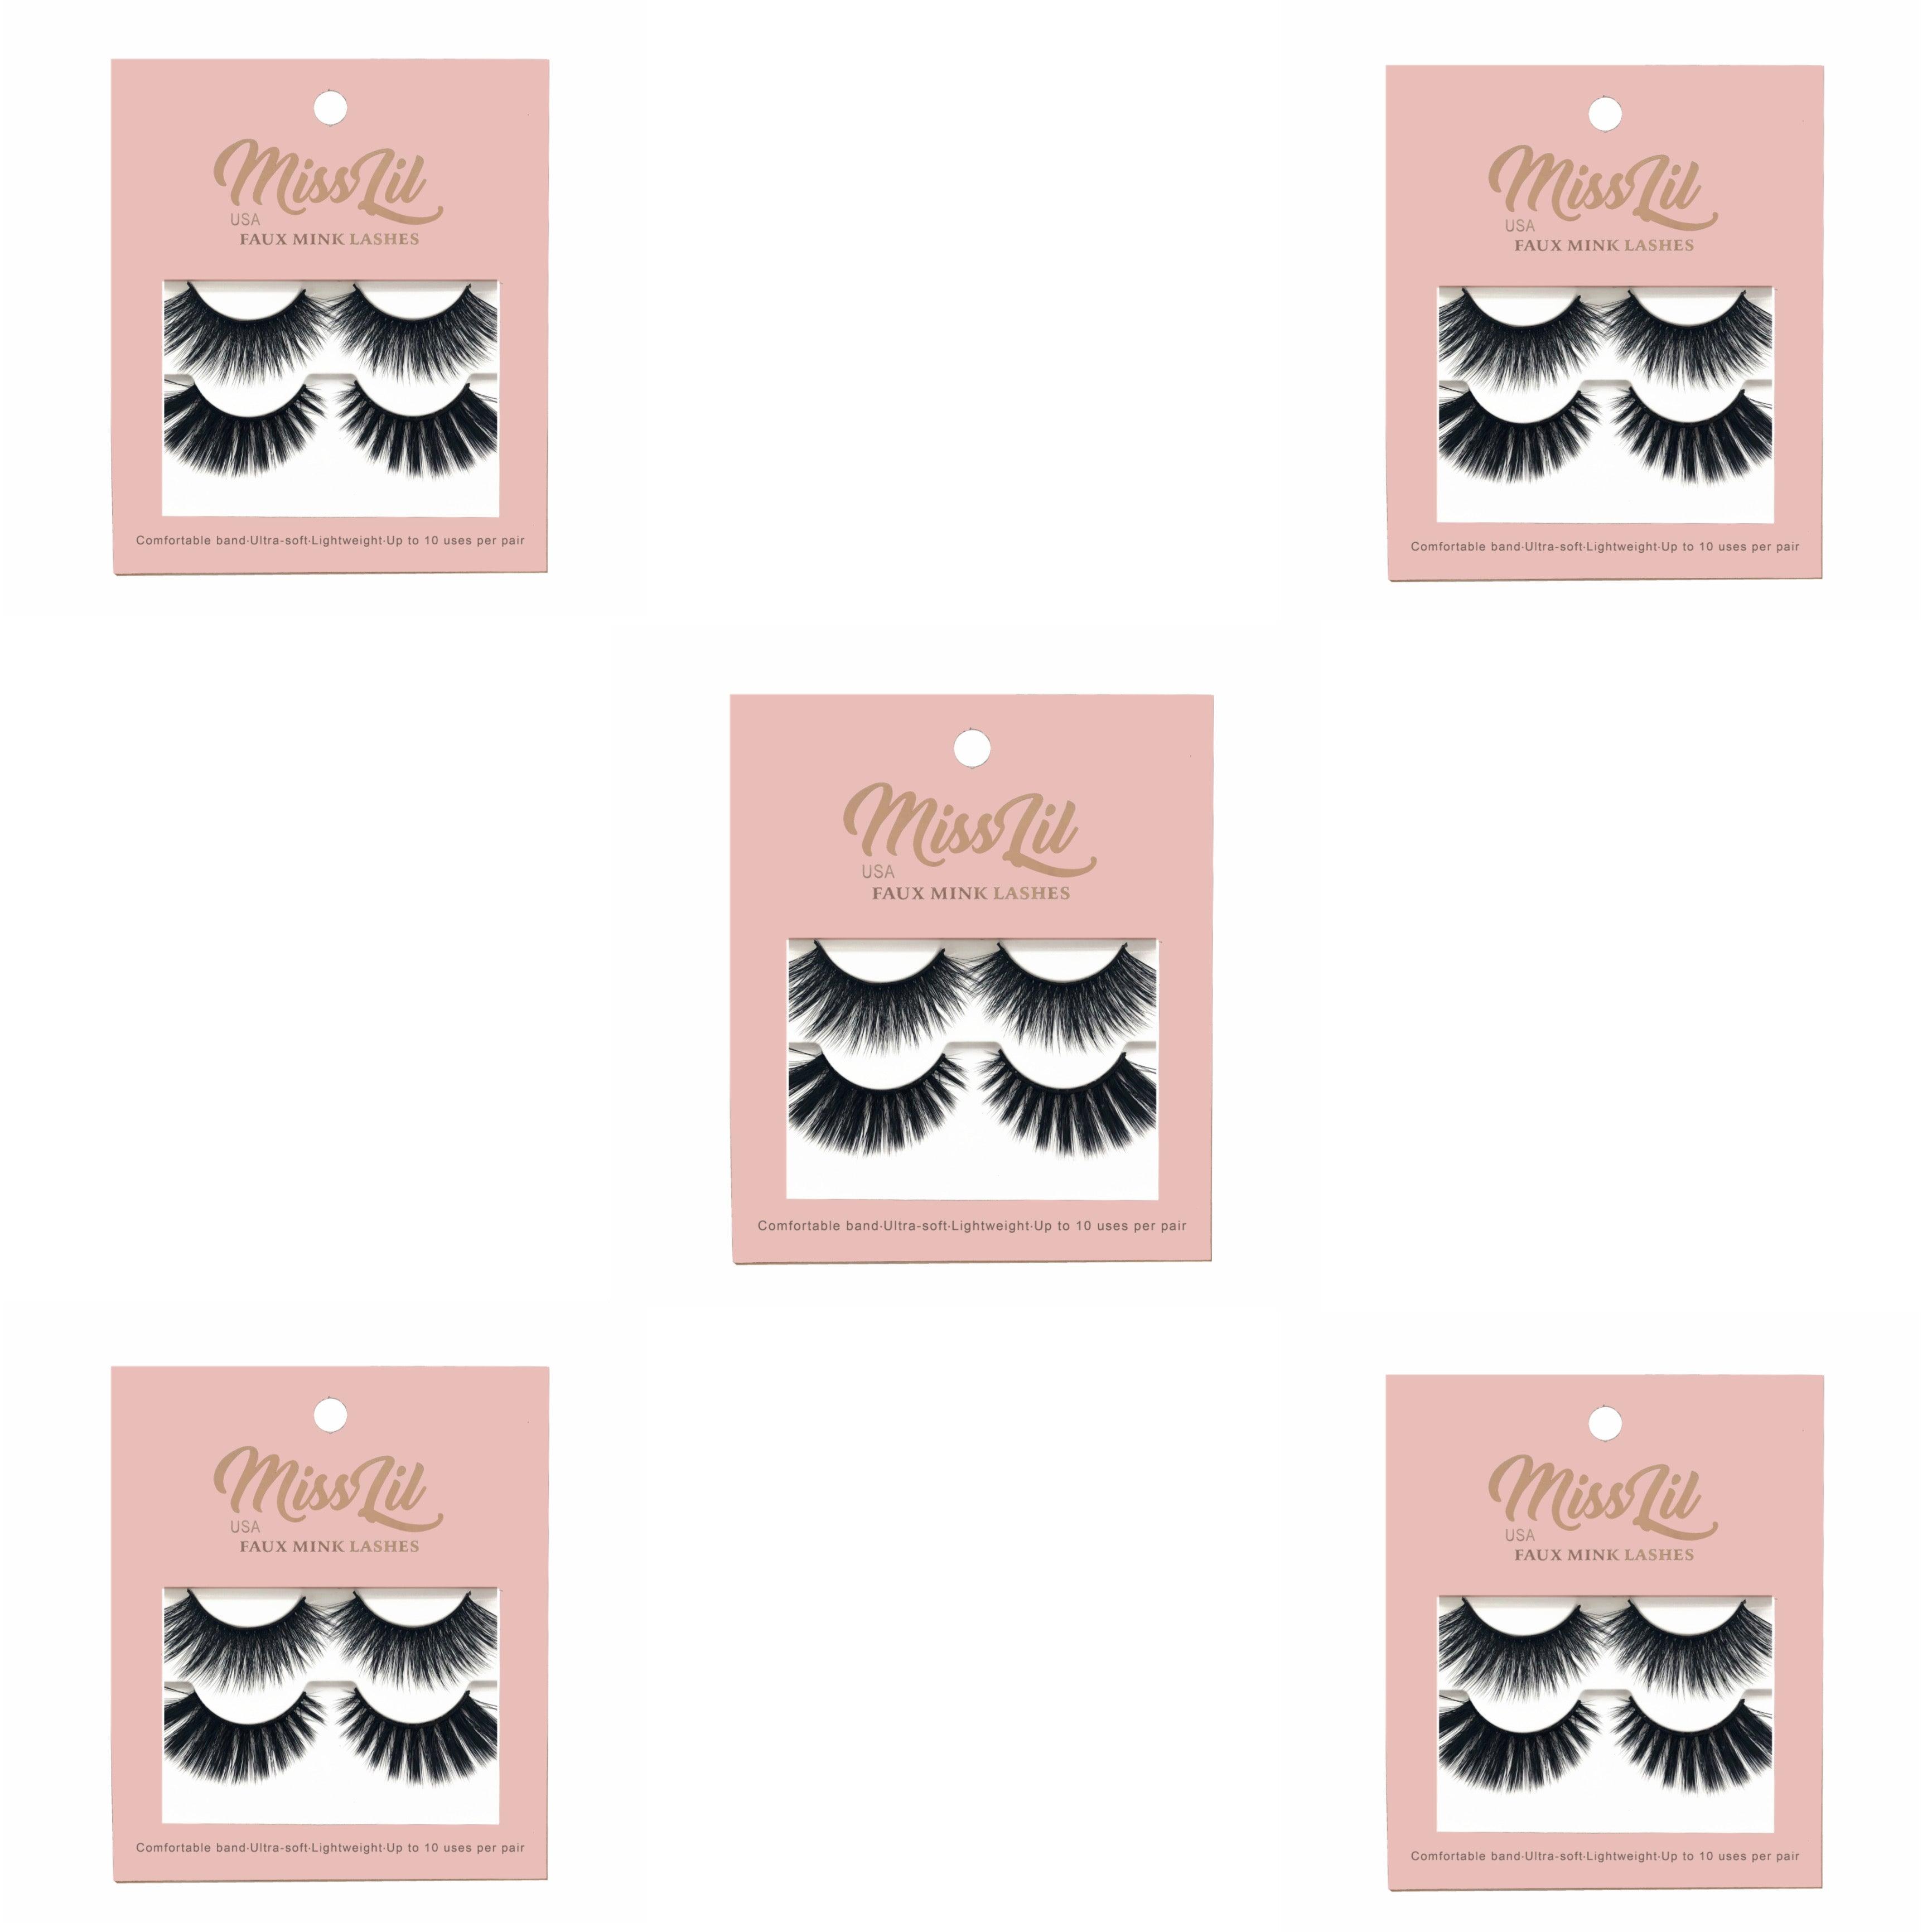 Miss Lil USA Lashes (5 Boxes) #5 - Miss Lil USA